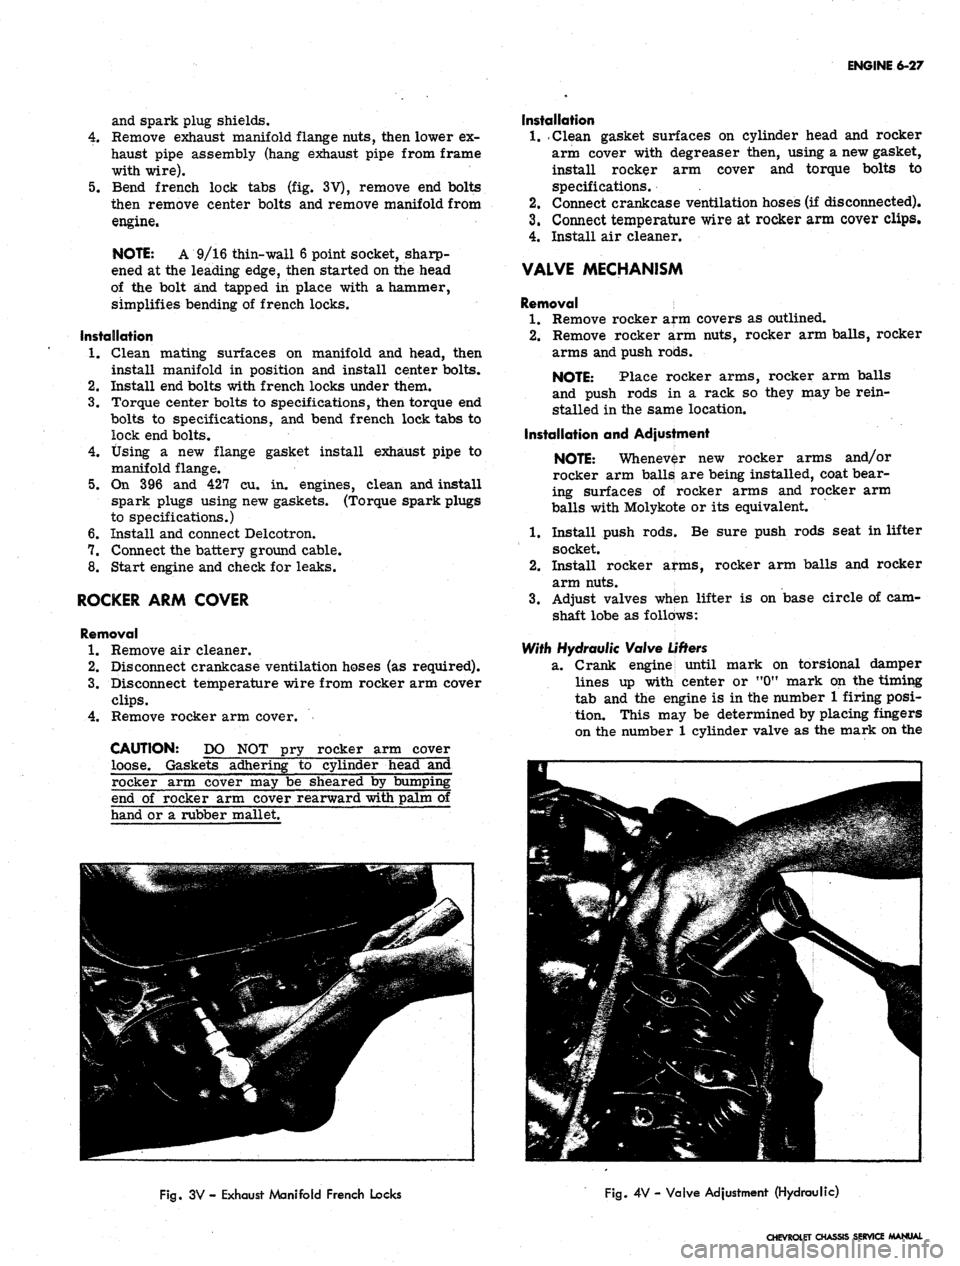 CHEVROLET CAMARO 1967 1.G Chassis Service Manual 
ENGINE 6-27

and spark plug shields.

4.
 Remove exhaust manifold flange nuts, then lower ex-

haust pipe assembly (hang exhaust pipe from frame

with wire).

5.
 Bend french lock tabs (fig. 3V), rem